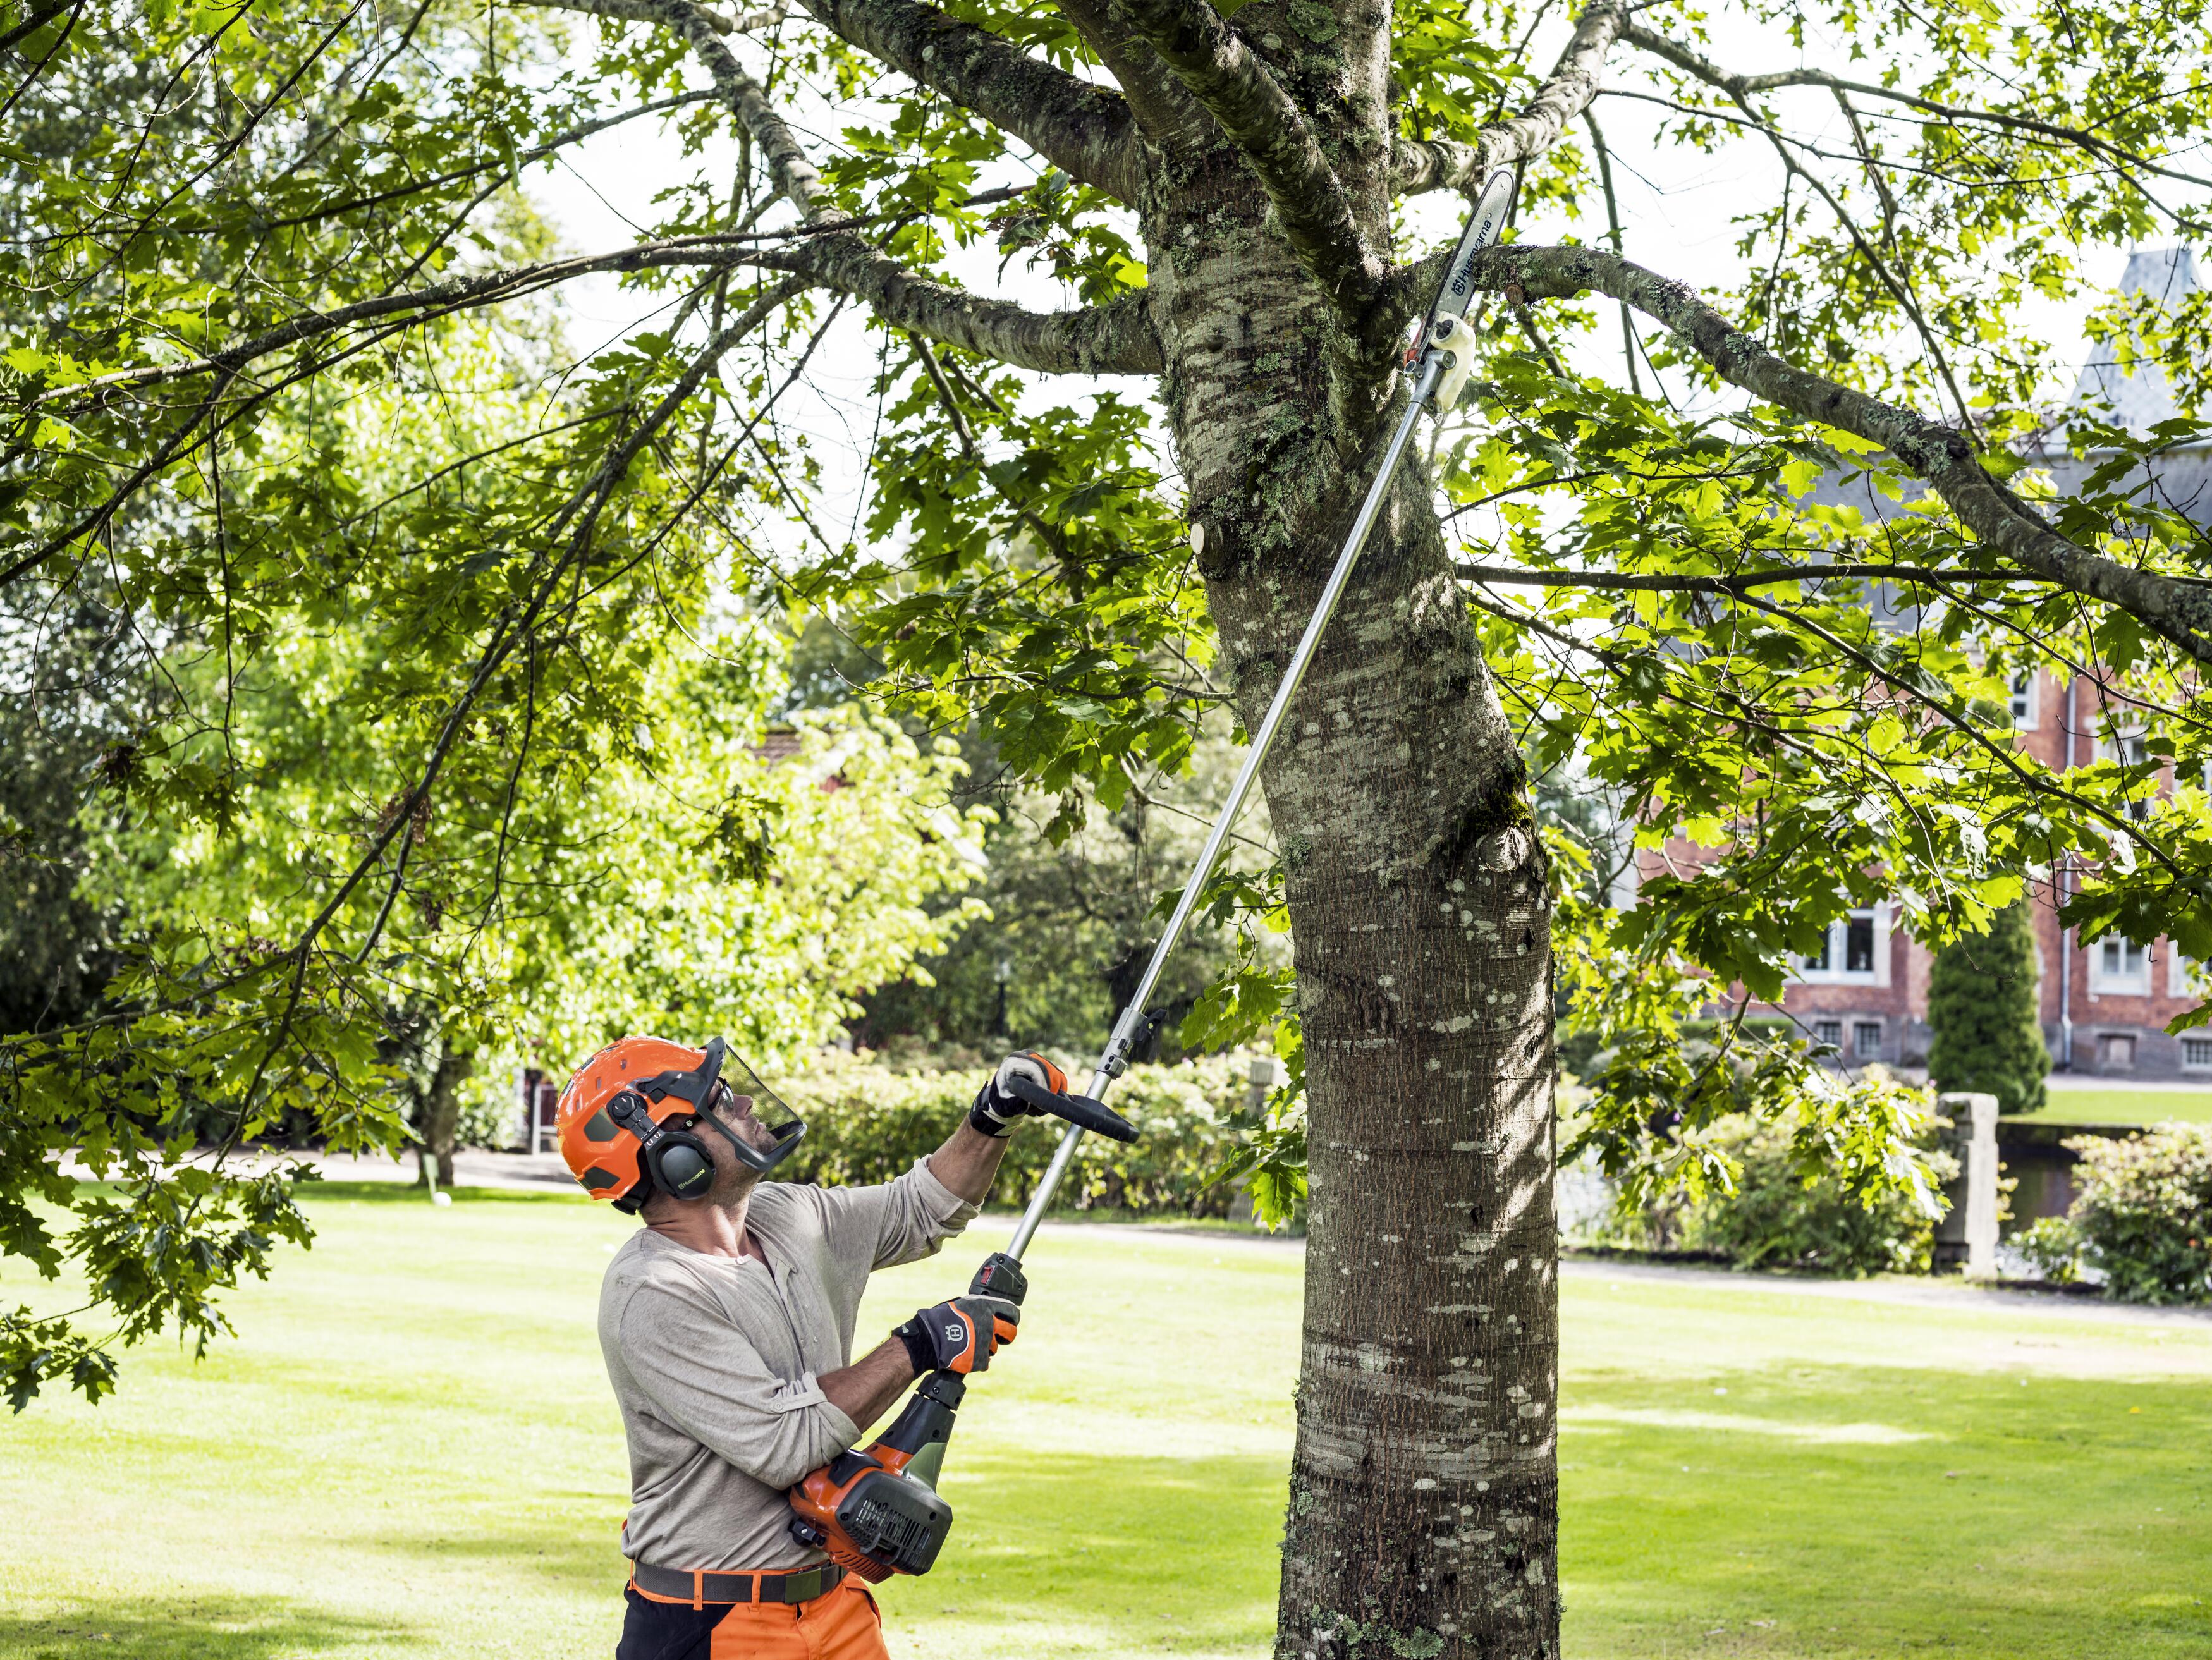 A Husqvarna Pole Saw is easy to start